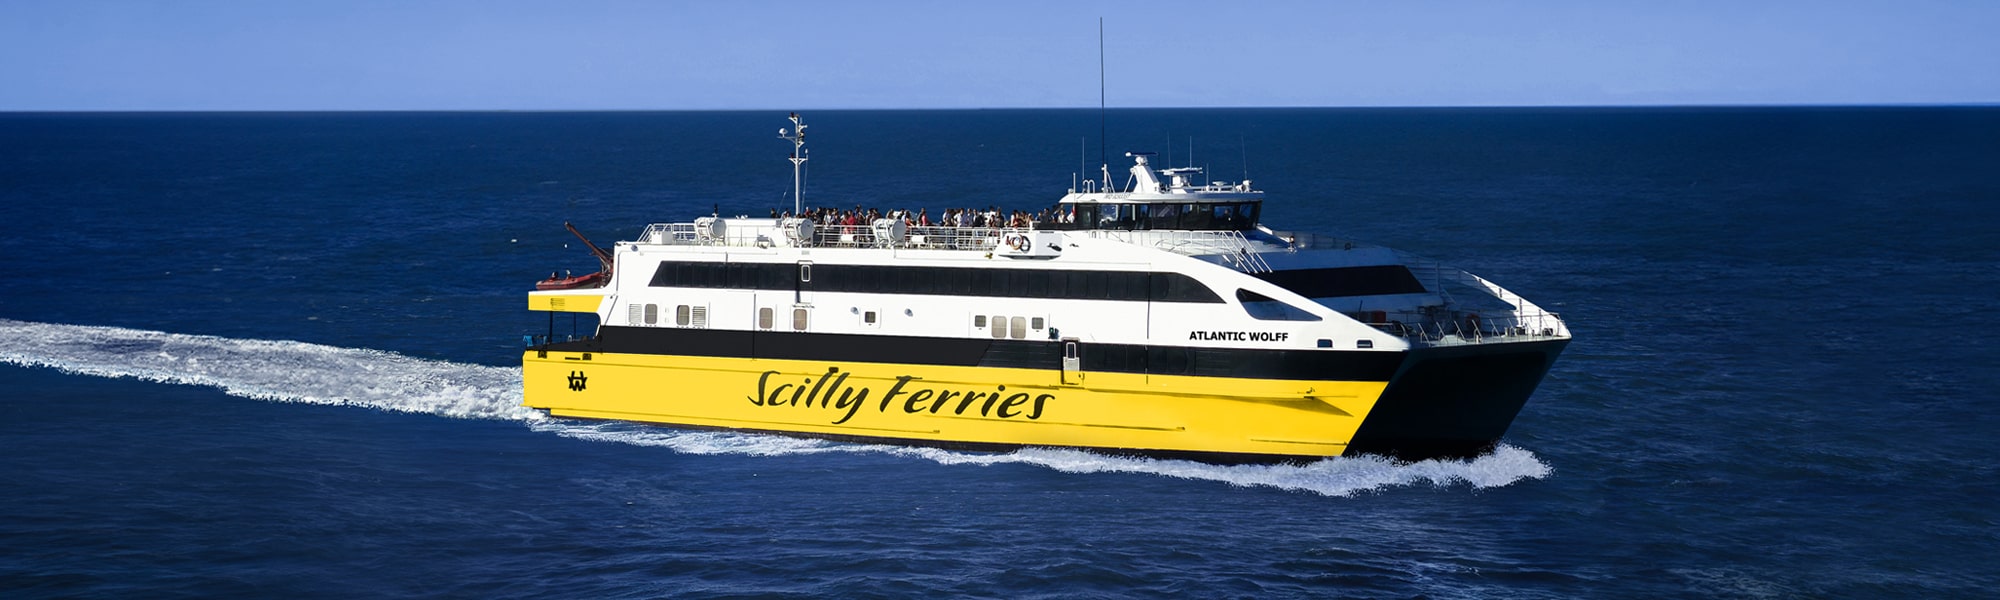 A high speed ferry of the type entering service in May